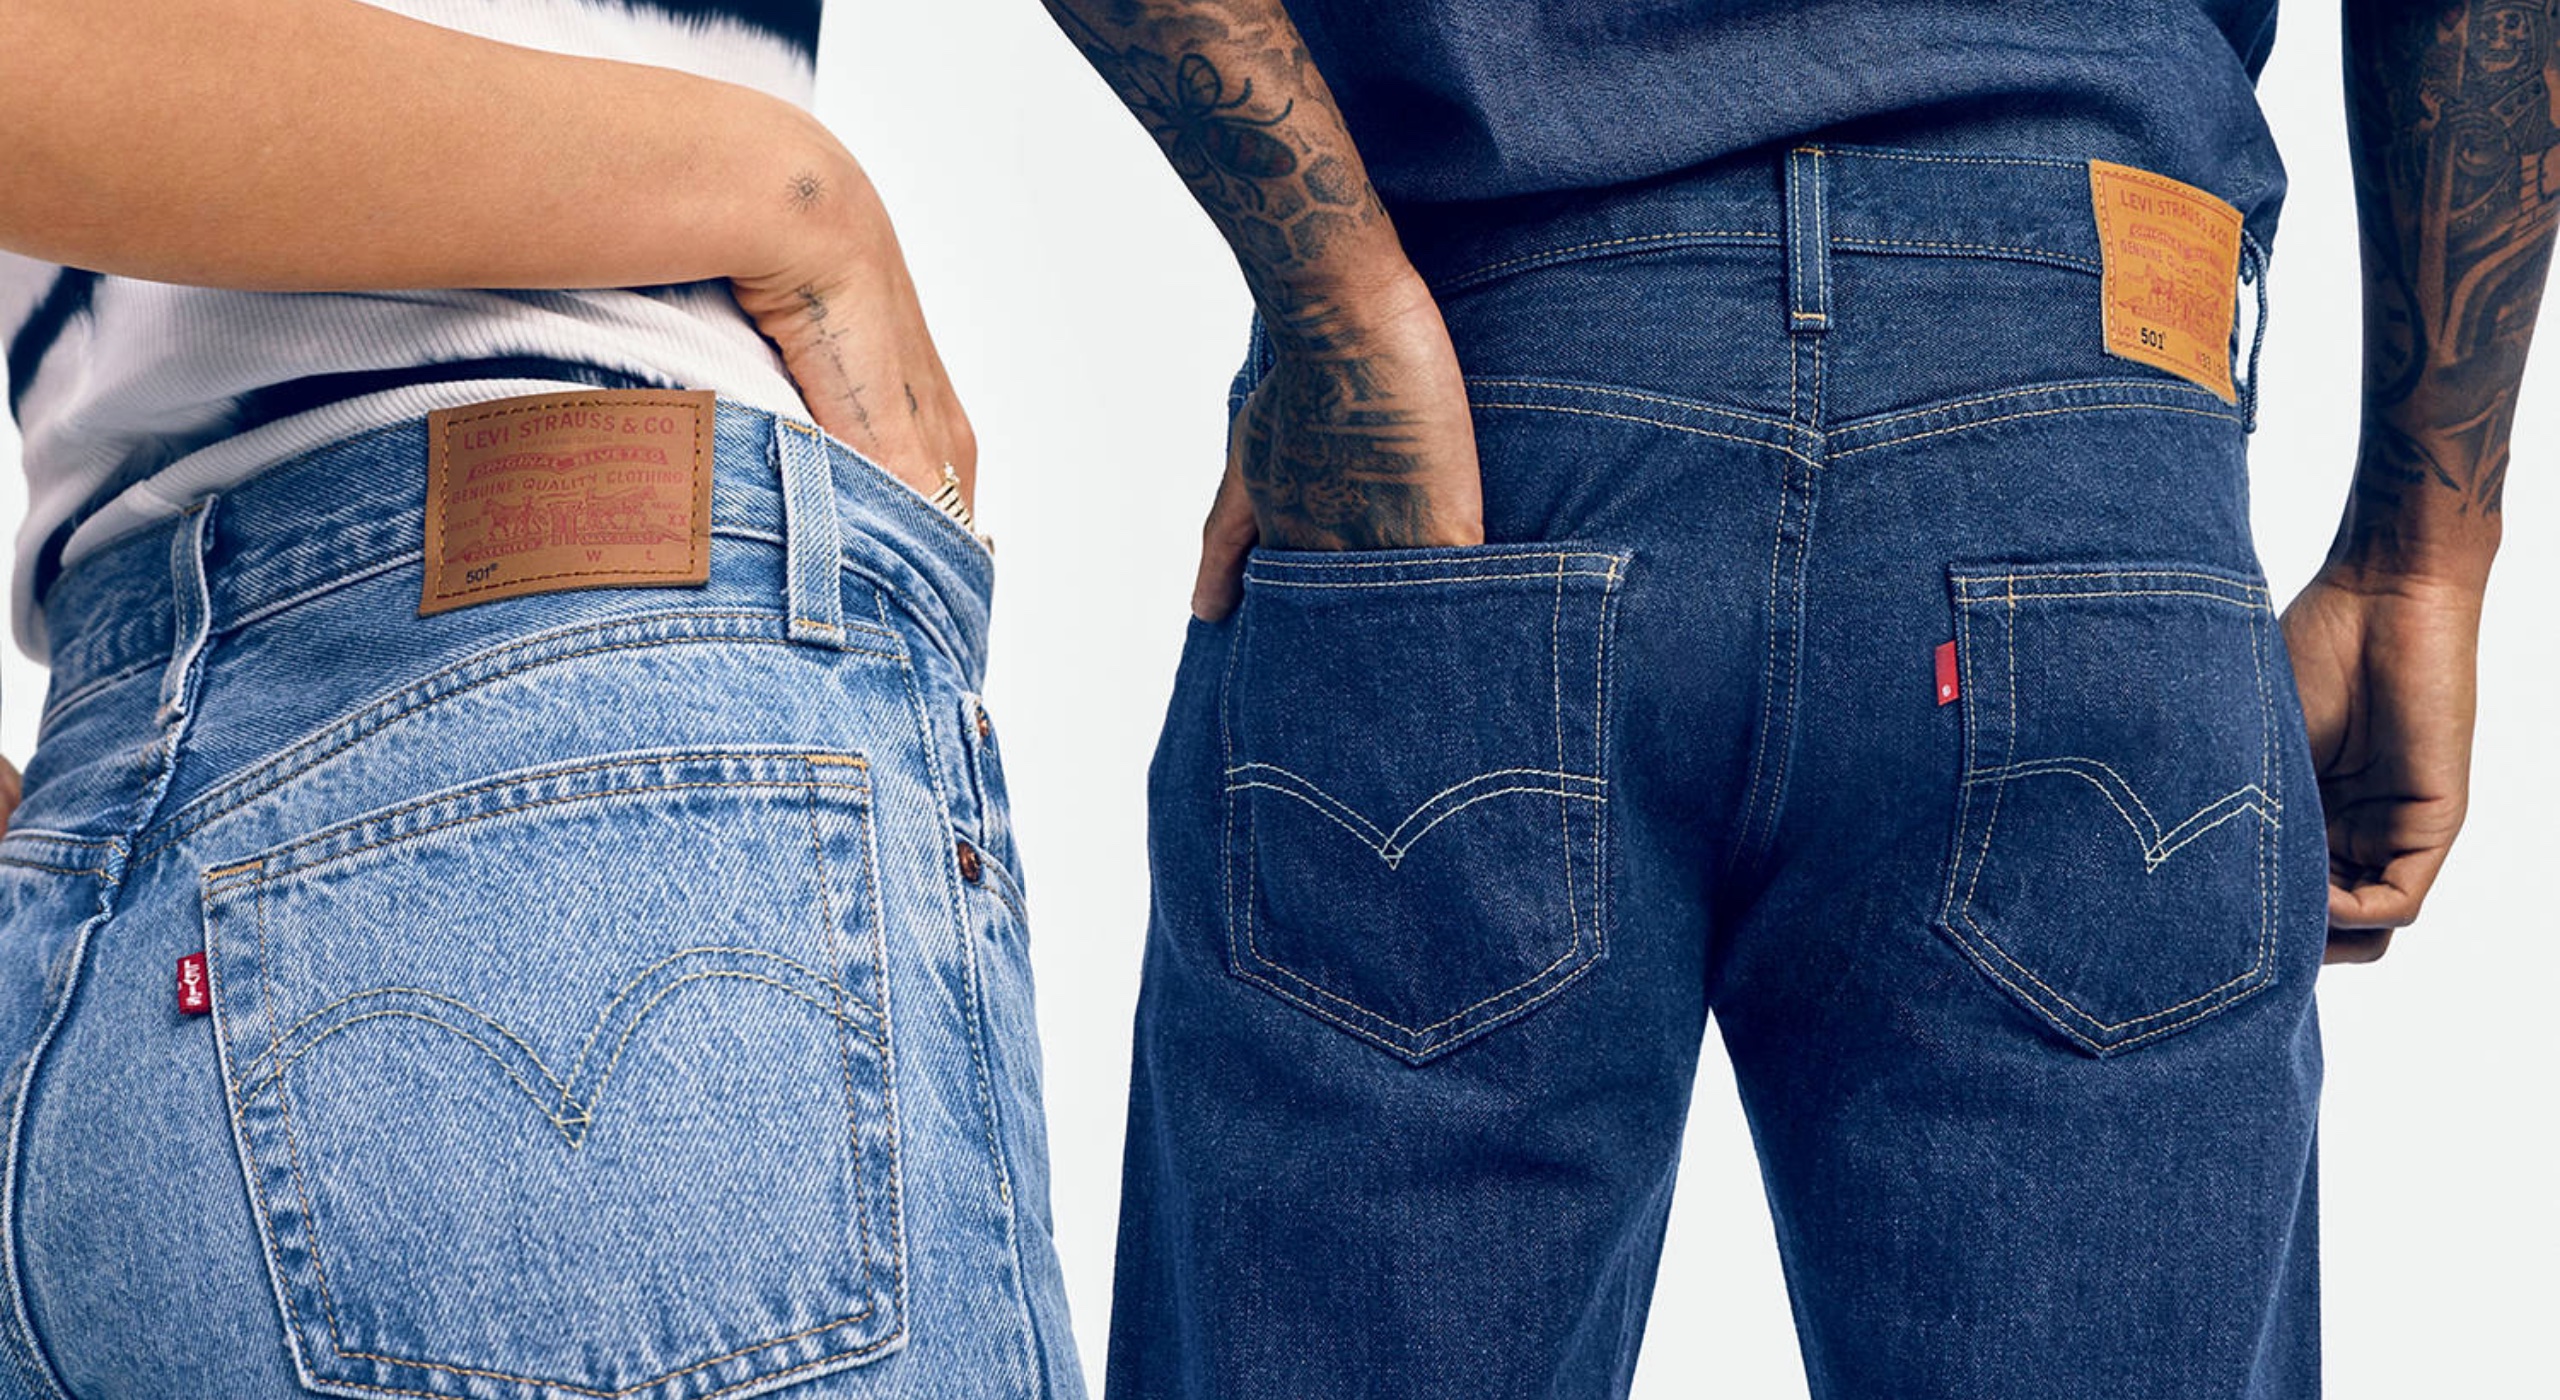 Levi's End of Season Sale takes up to 50% off best-selling jeans from $30,  more